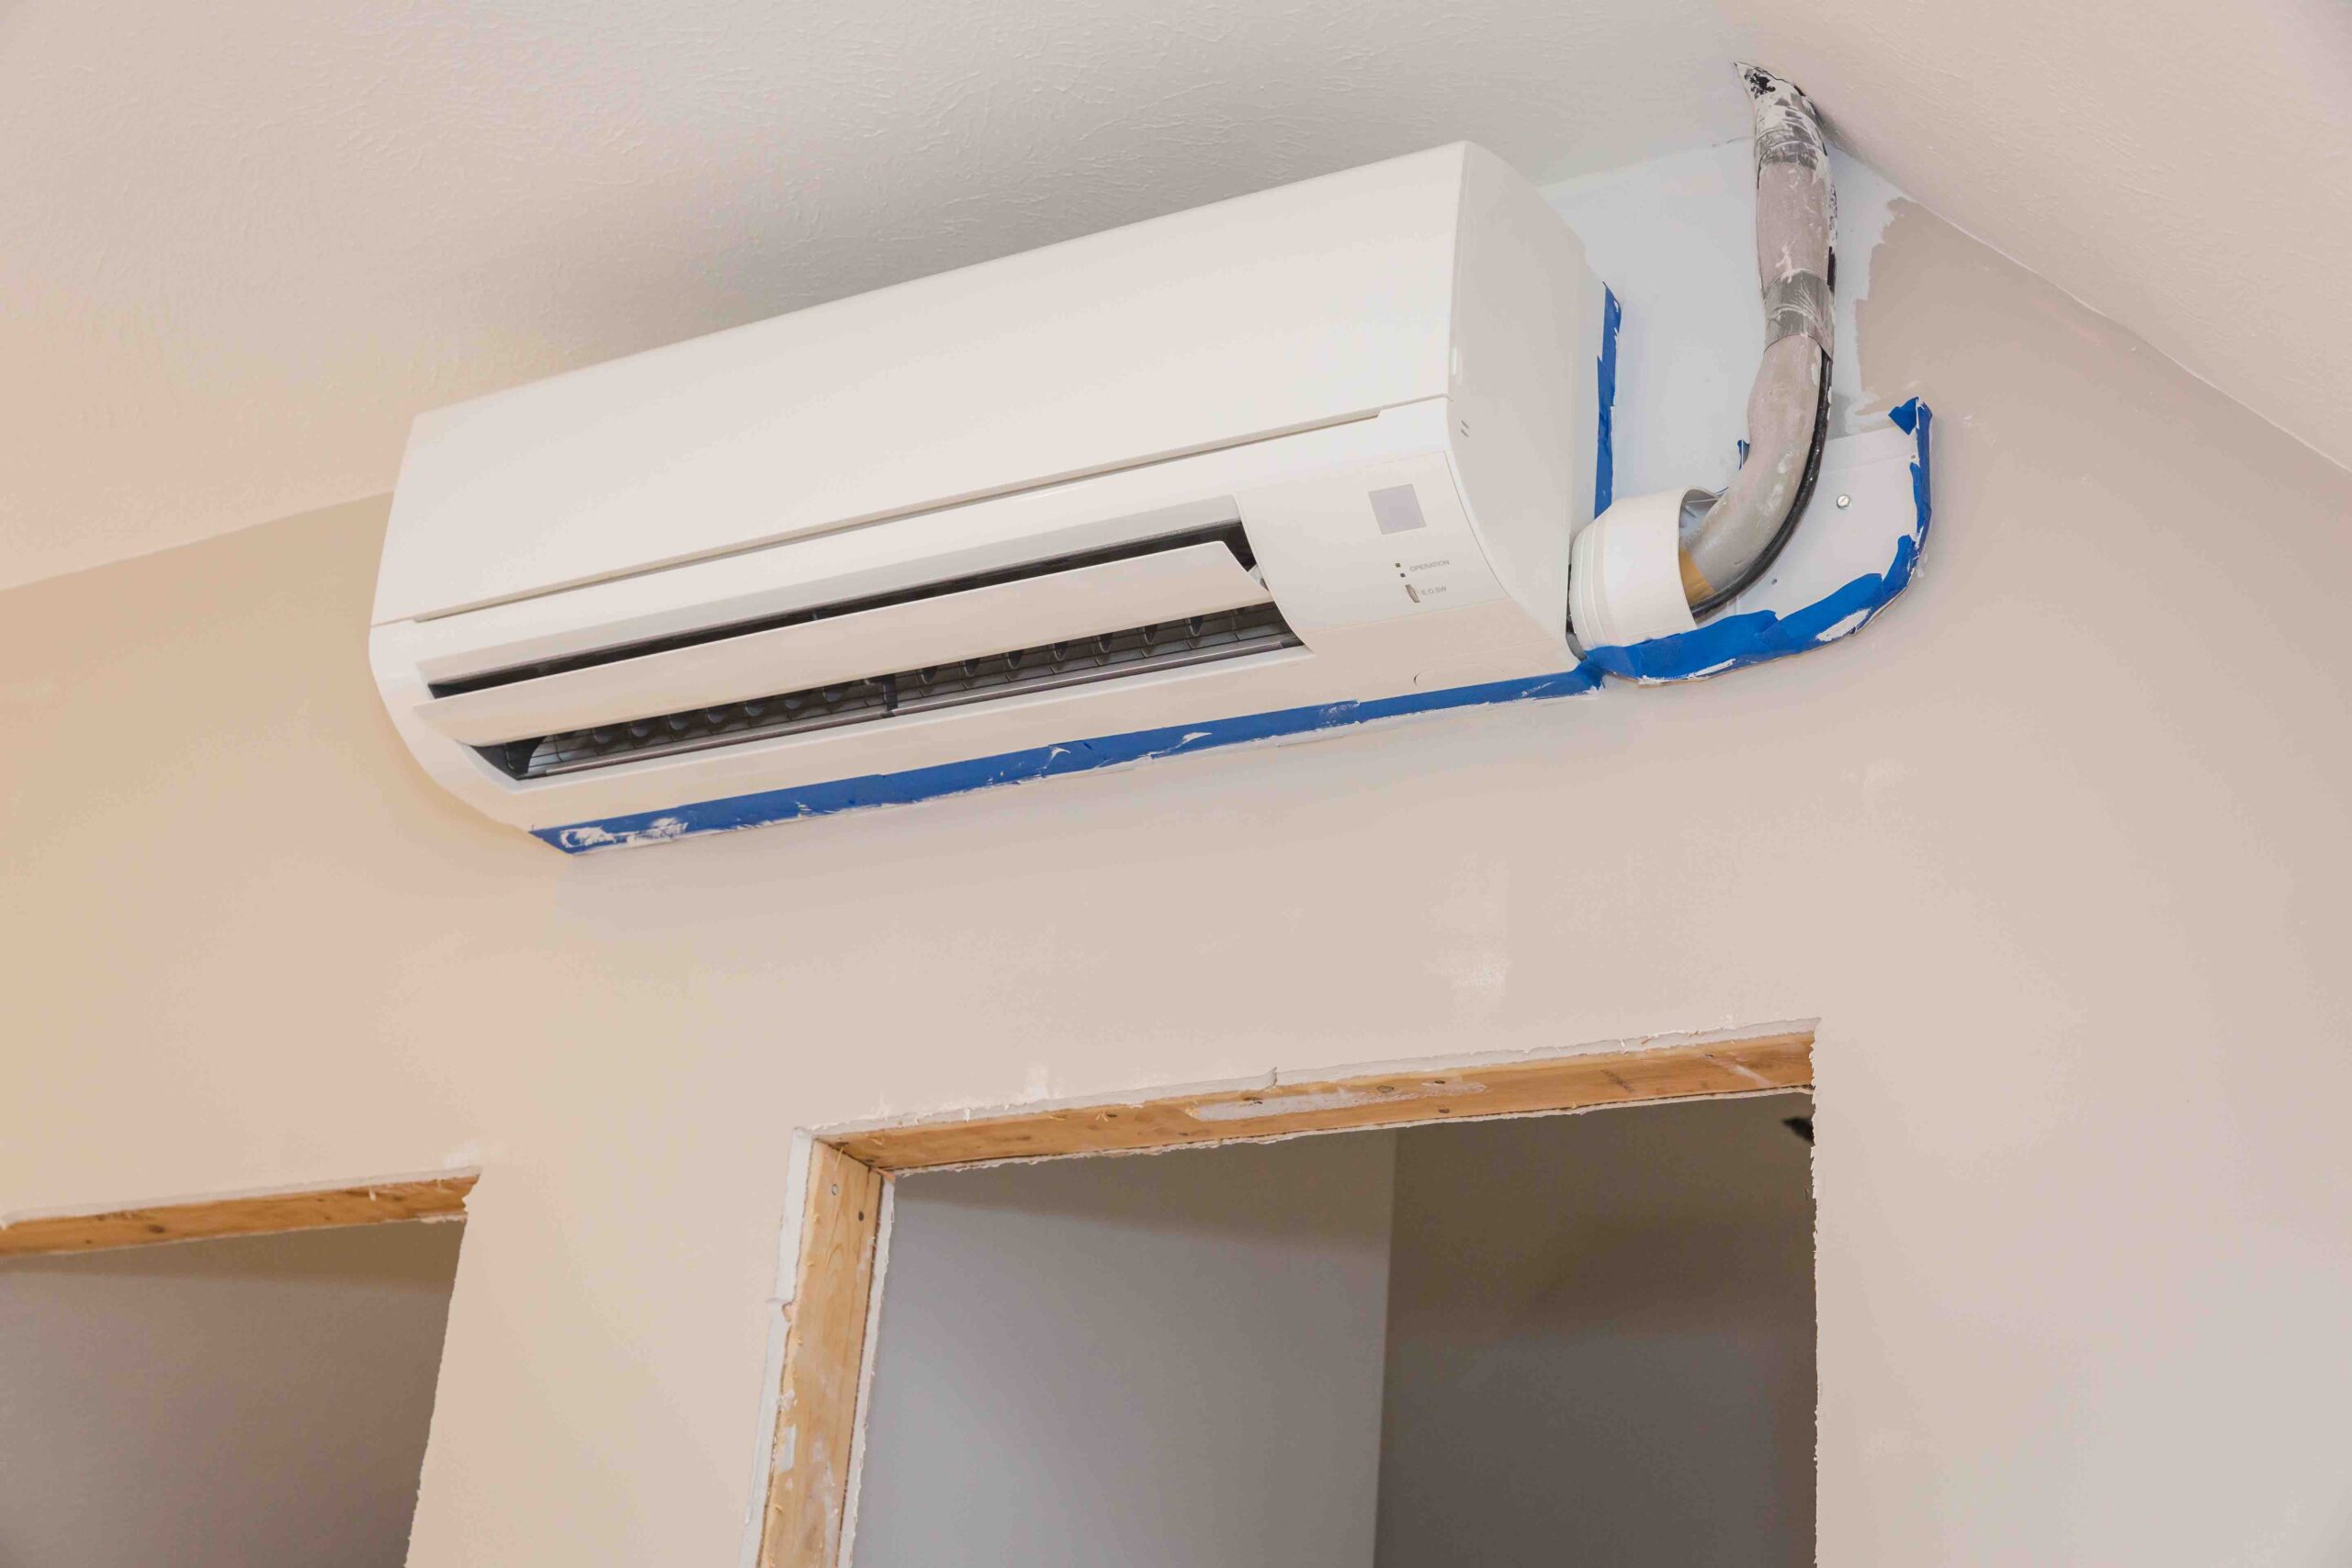 Mini-split ductless air conditioning unit installed in unfinished room with painter's tape around it